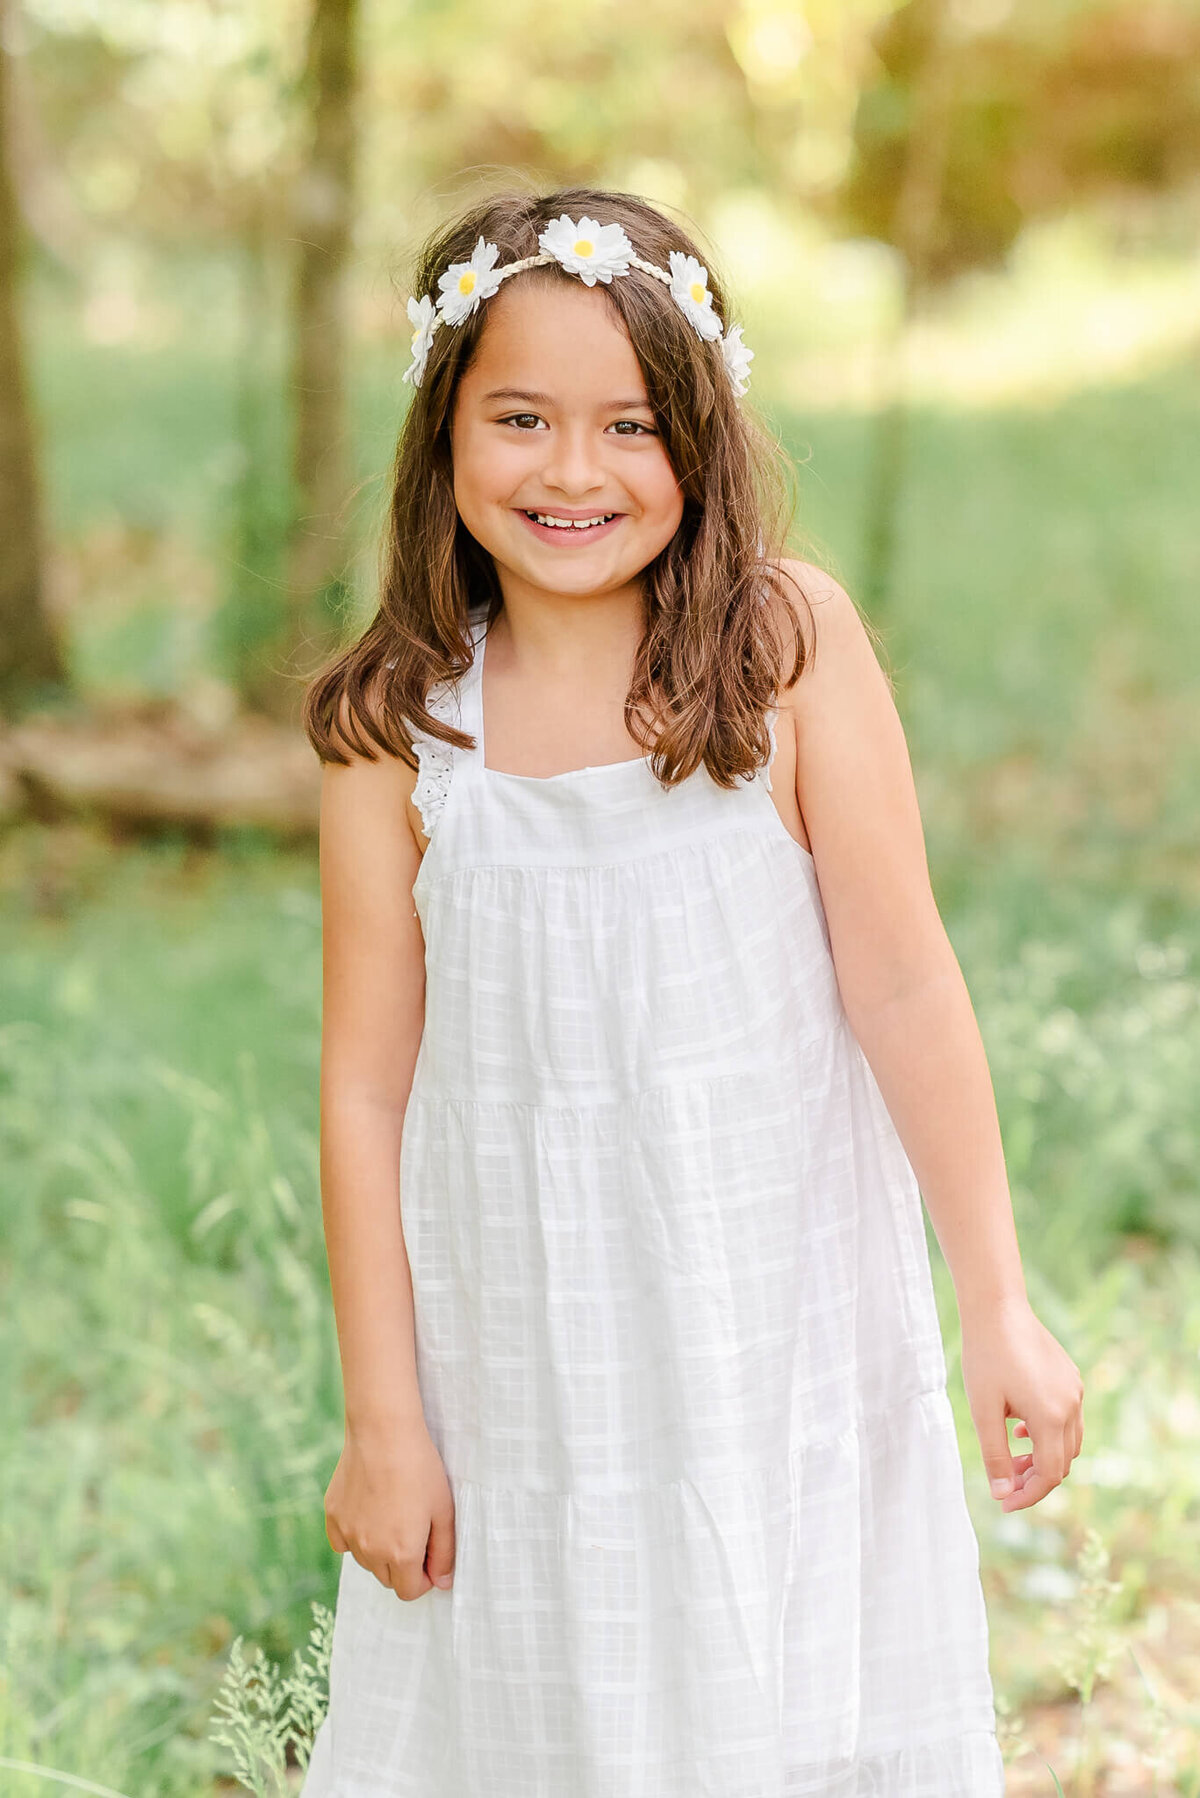 A young girl wearing a white dress and flower crown smiles for the camera at a park in Norfolk, VA.